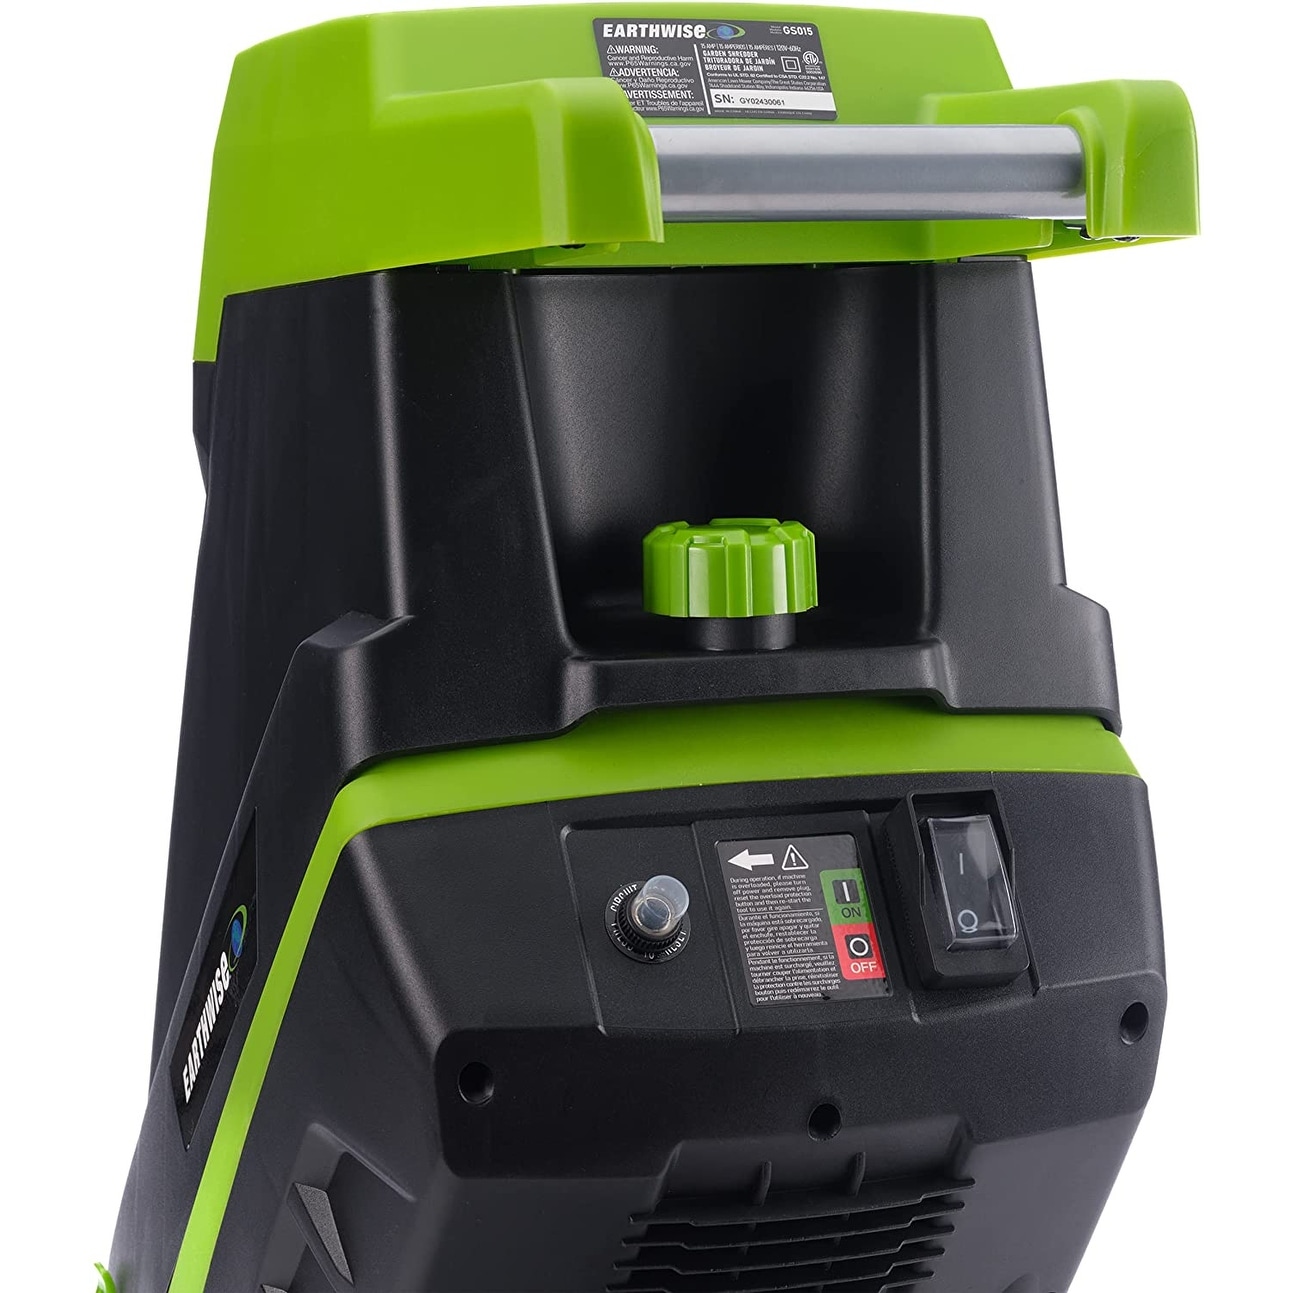 Earthwise 15-Amp Electric Corded Chipper/Shredder with Collection Bag - Green/Black